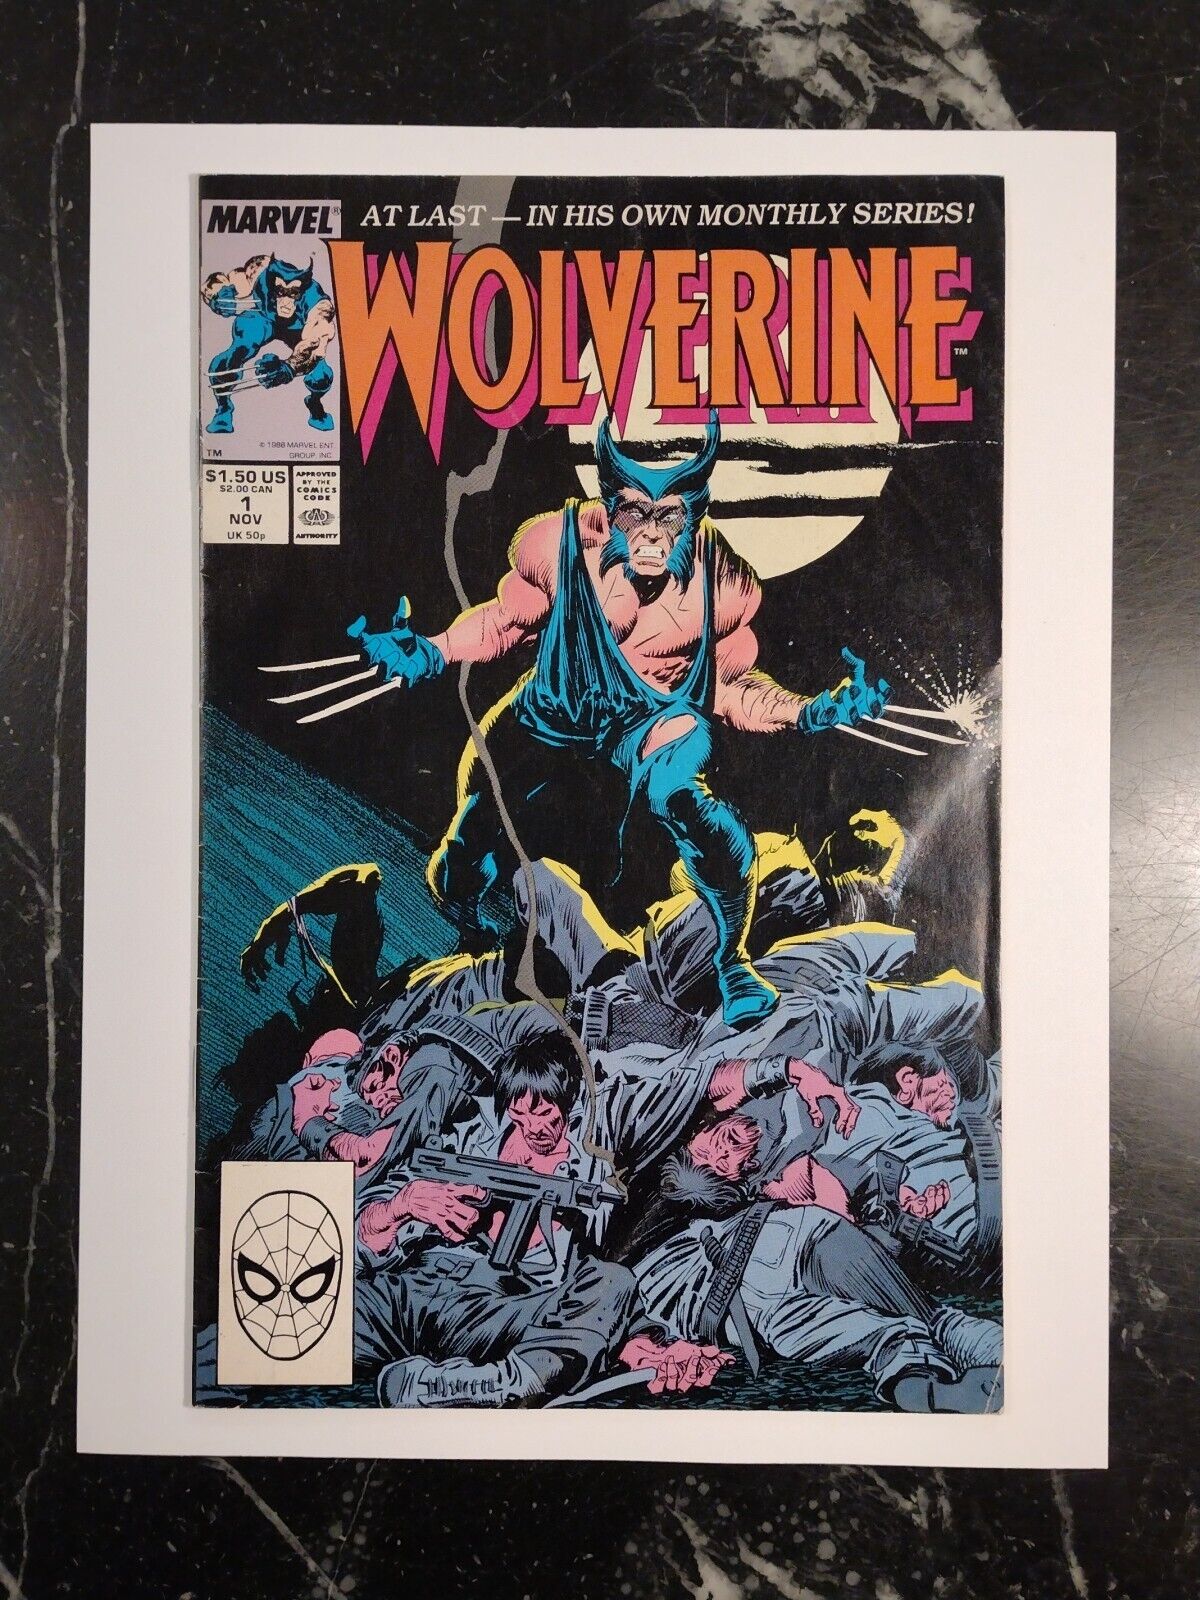 Wolverine #1  VERY GOOD 4.0   1st Wolverine As Patch, 1st Print HOT🔥 KEY🔑 1988